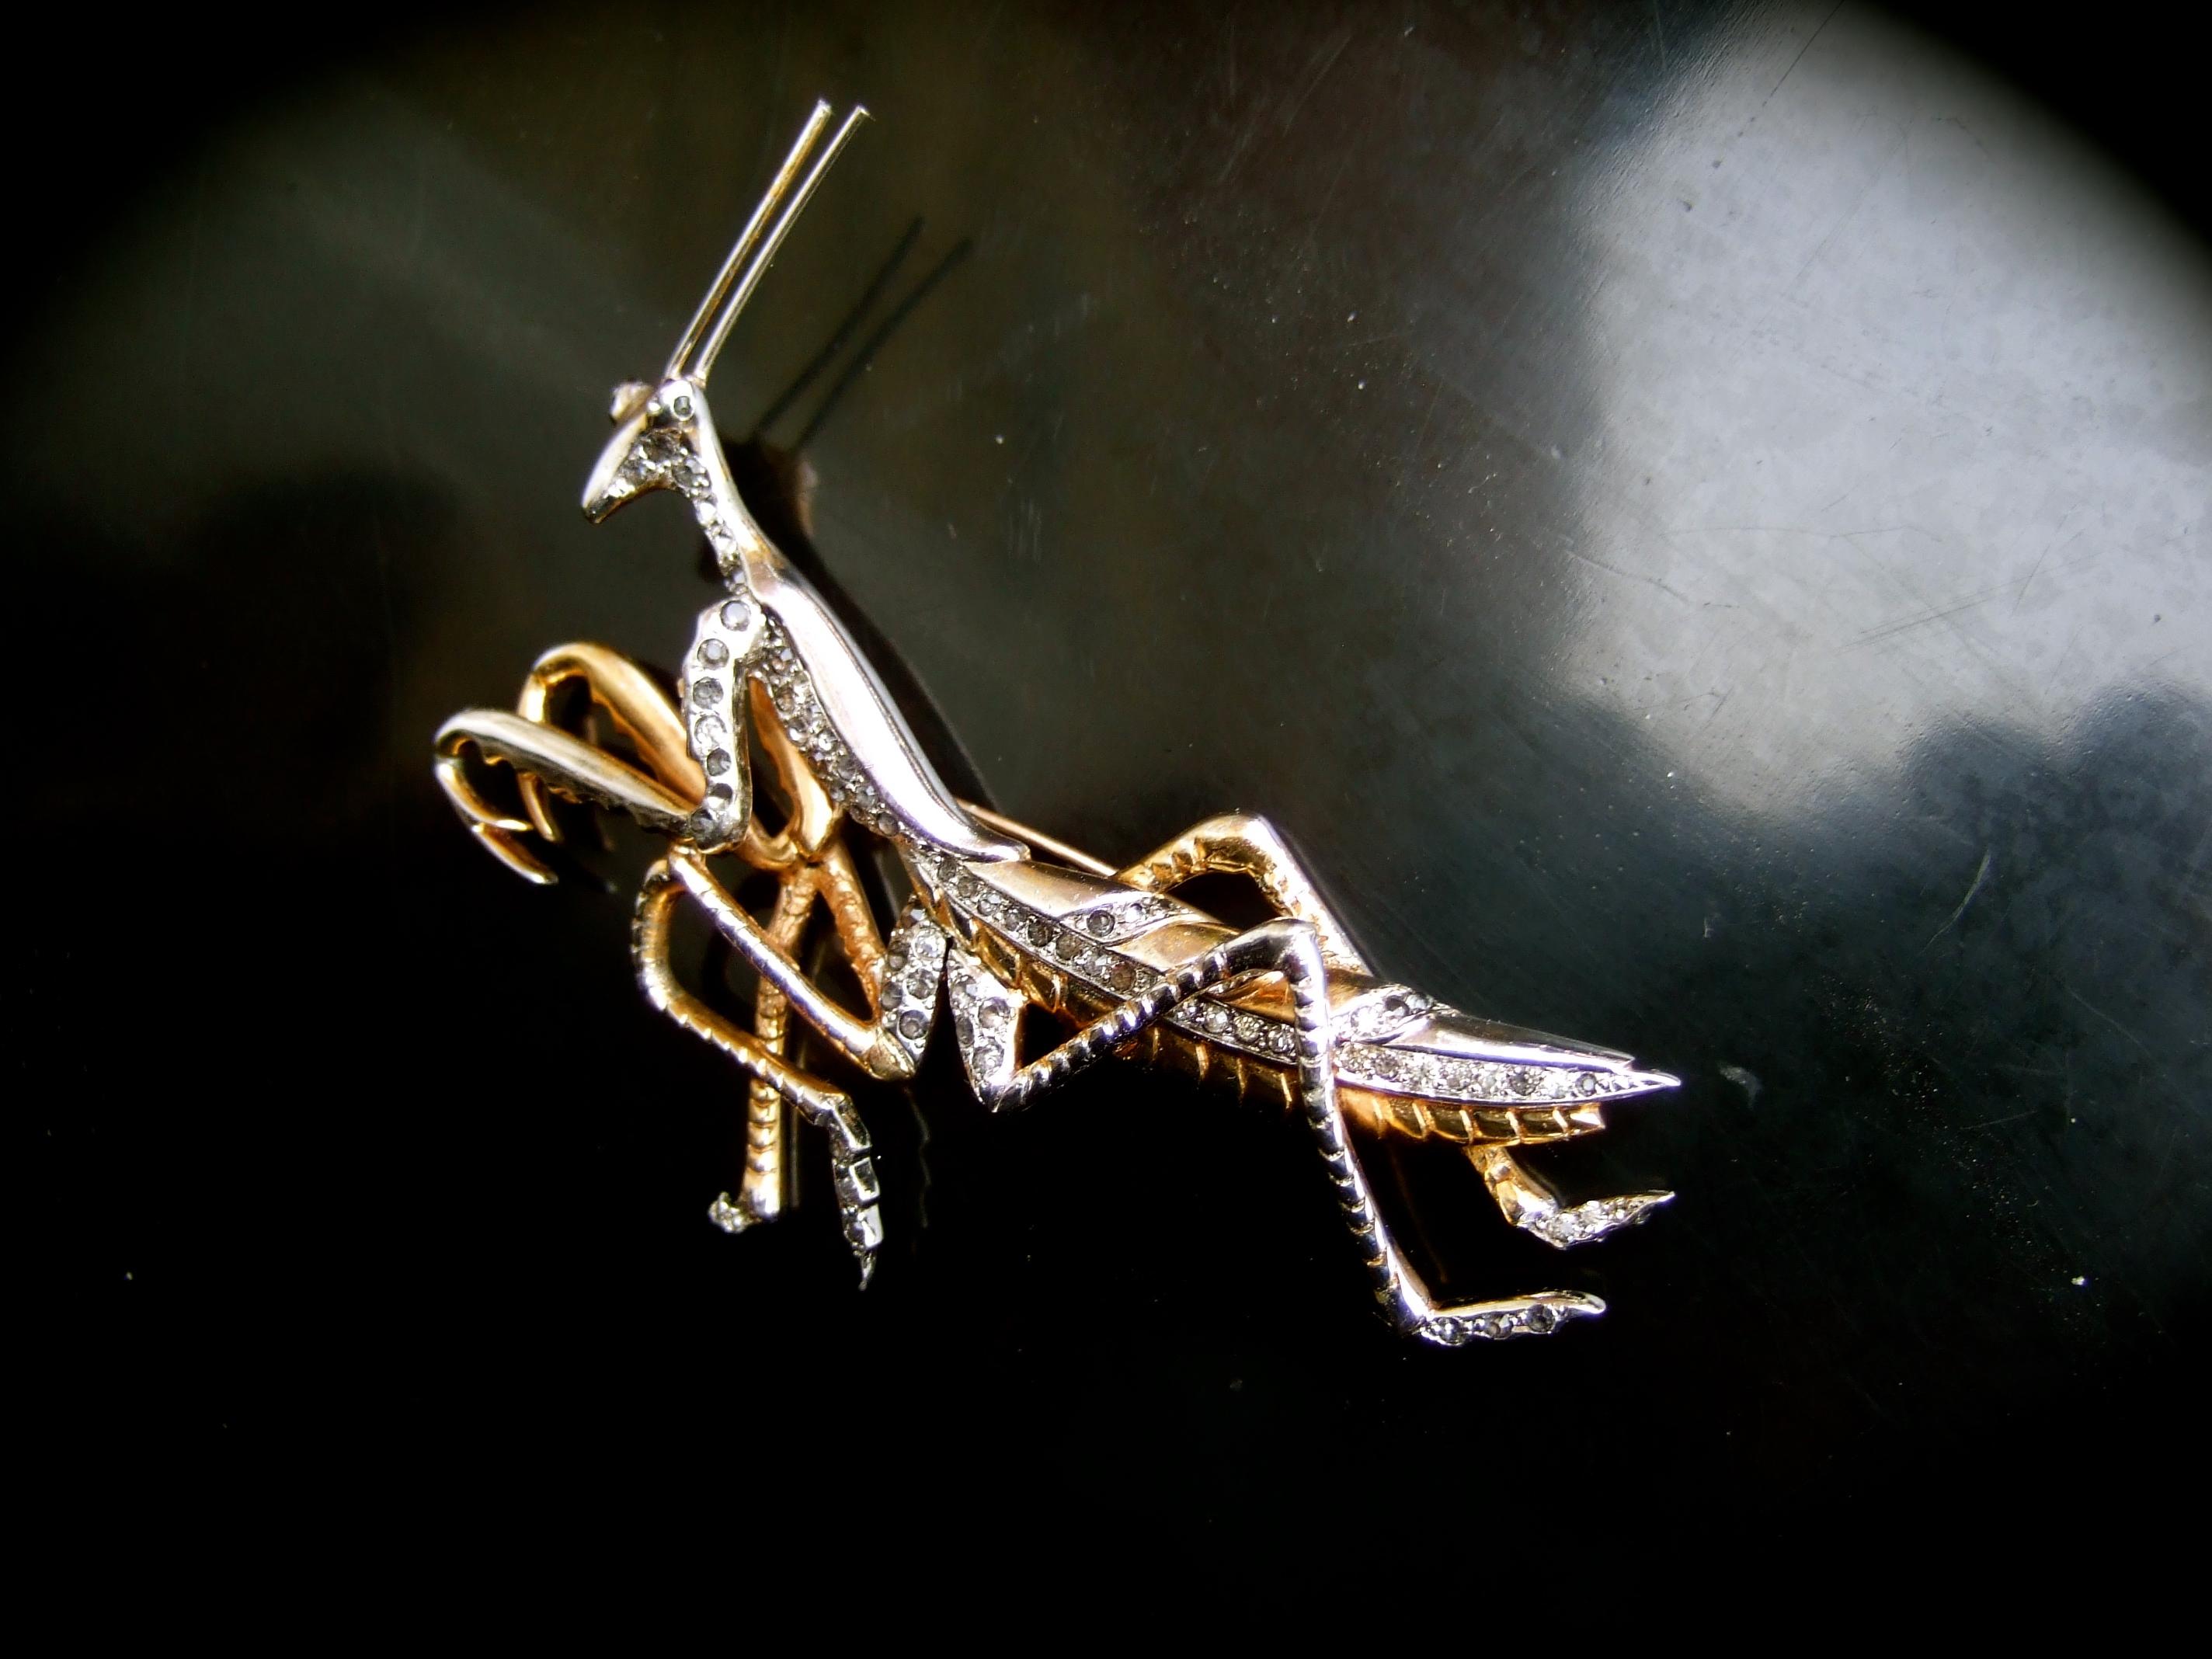 Marcel Boucher Extremely rare art deco praying mantis costume insect brooch c 1941
The rare avant-garde 1940s figural brooch is designed with a stylized praying mantis insect
Adorned with metal rod antennas on top of the head

The legs & body are